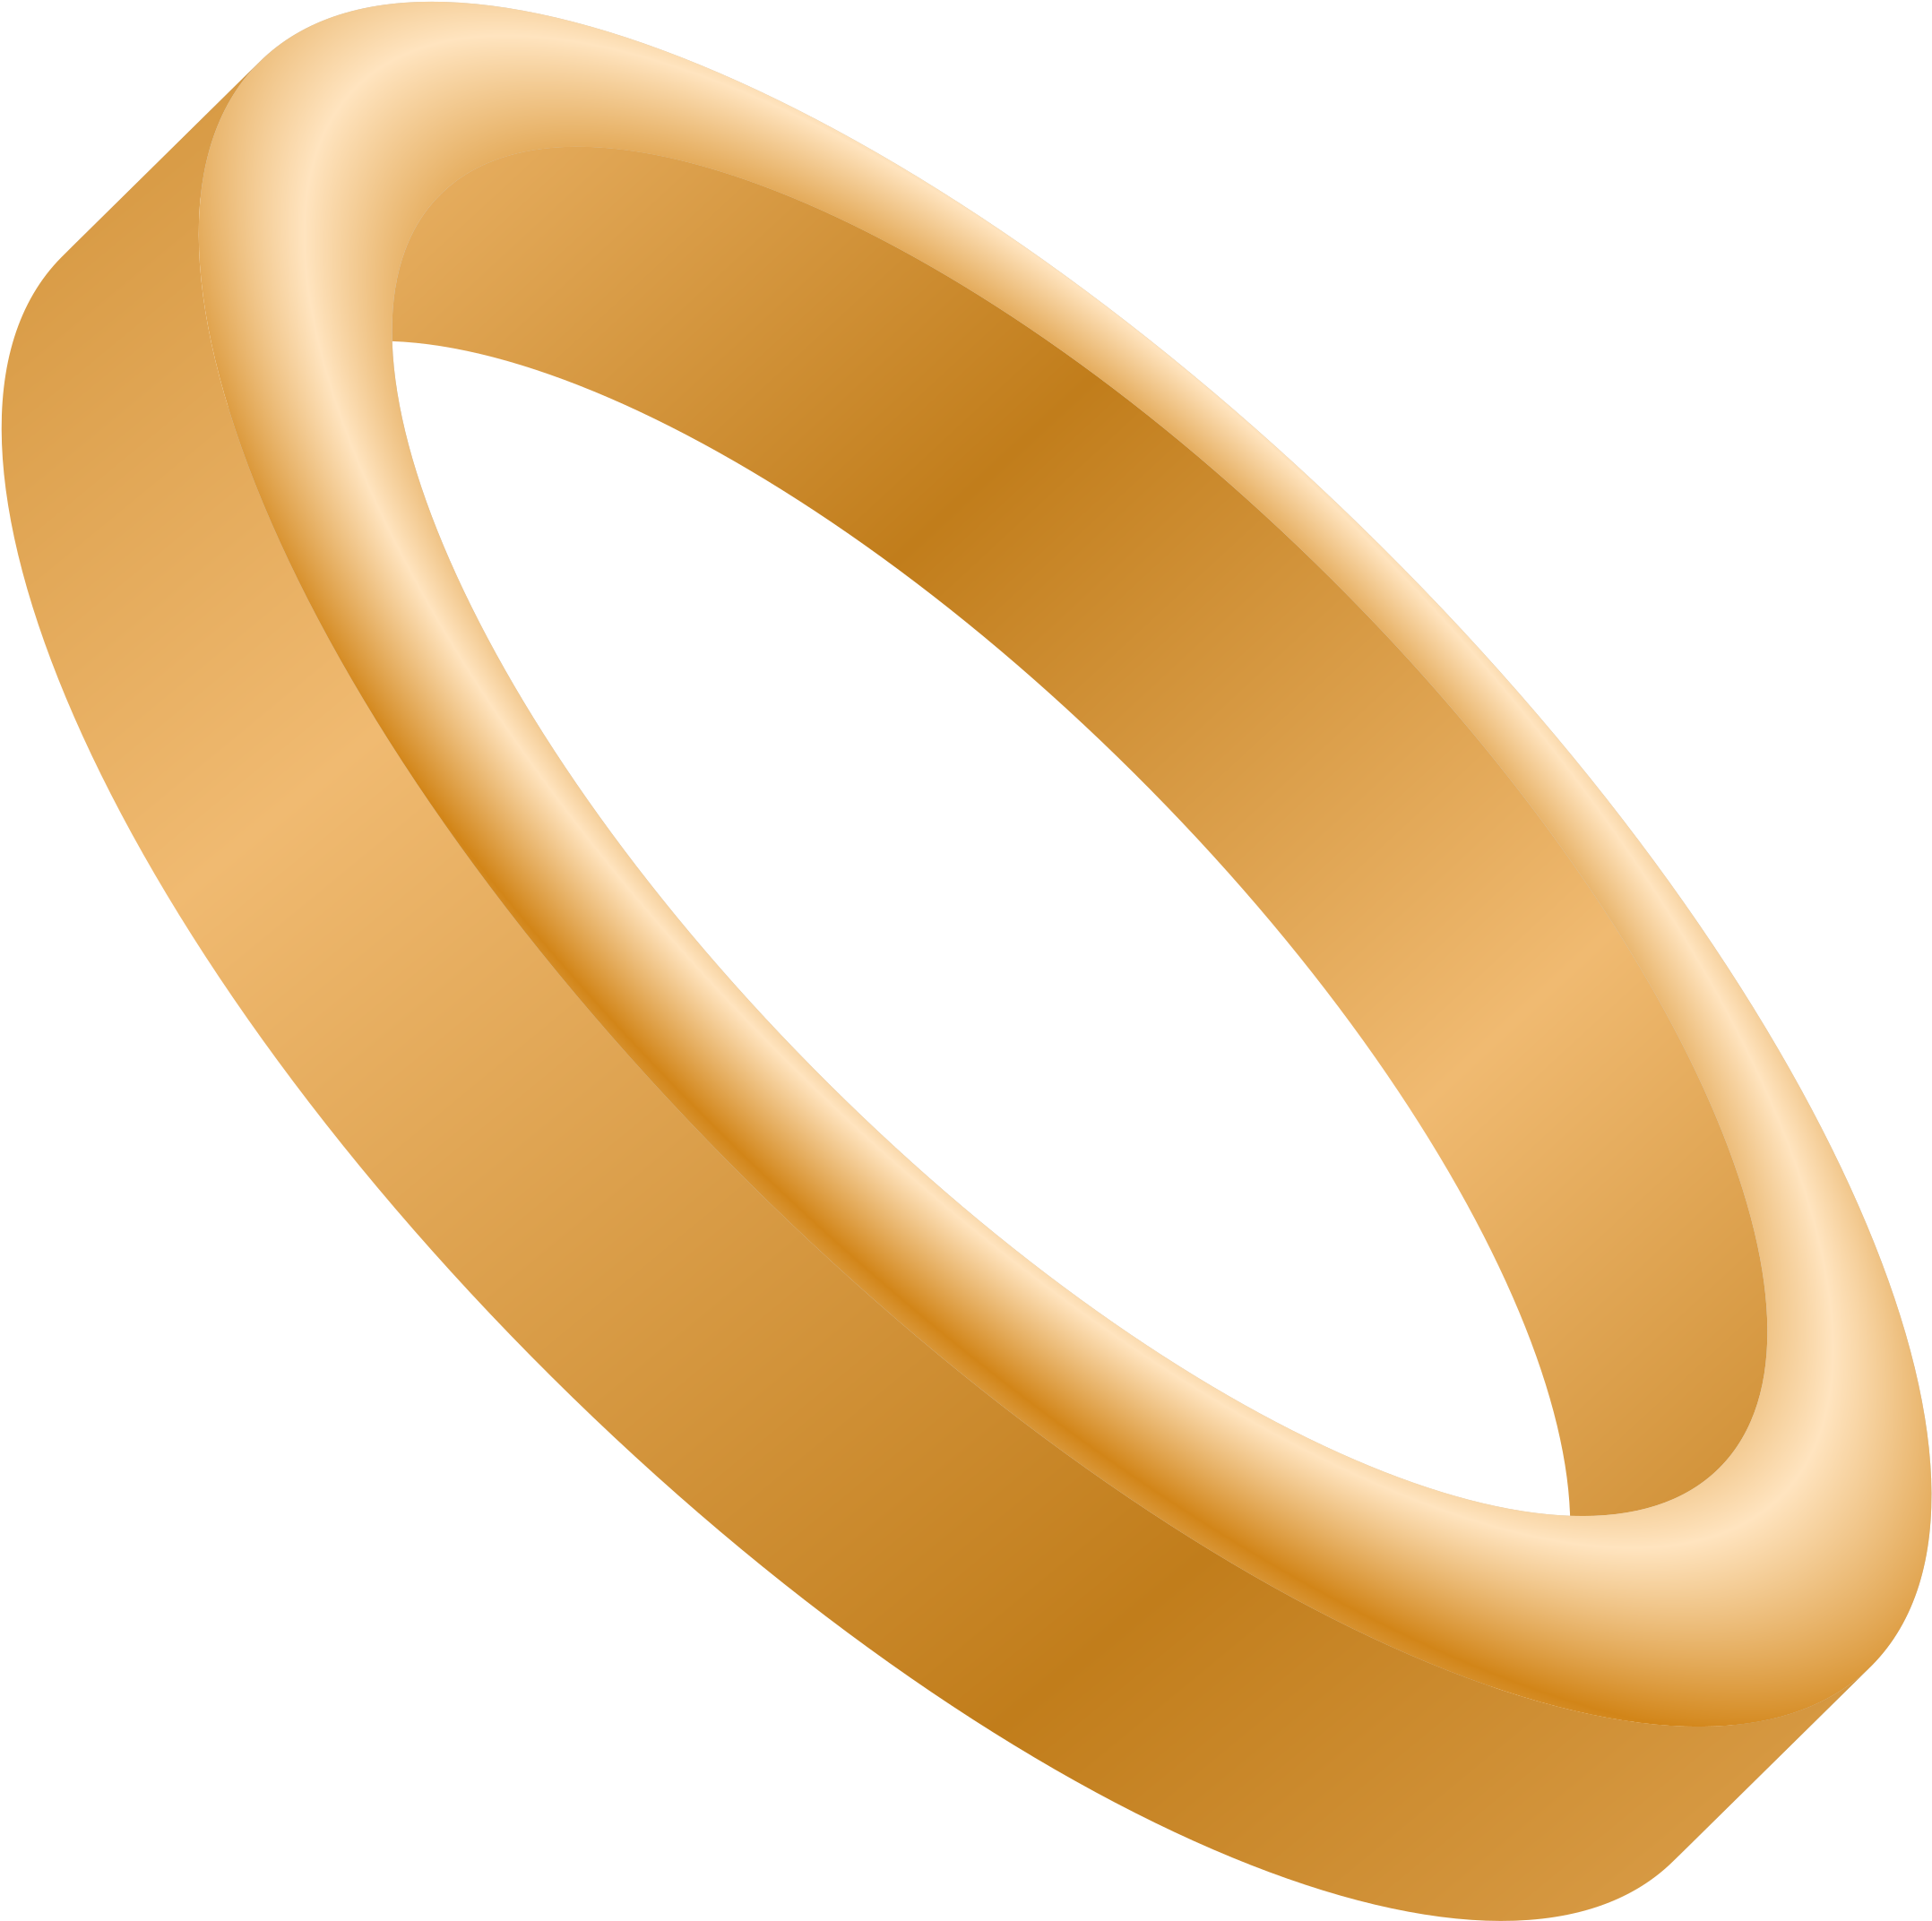 Big Image - Gold Ring Clipart (2400x2400)